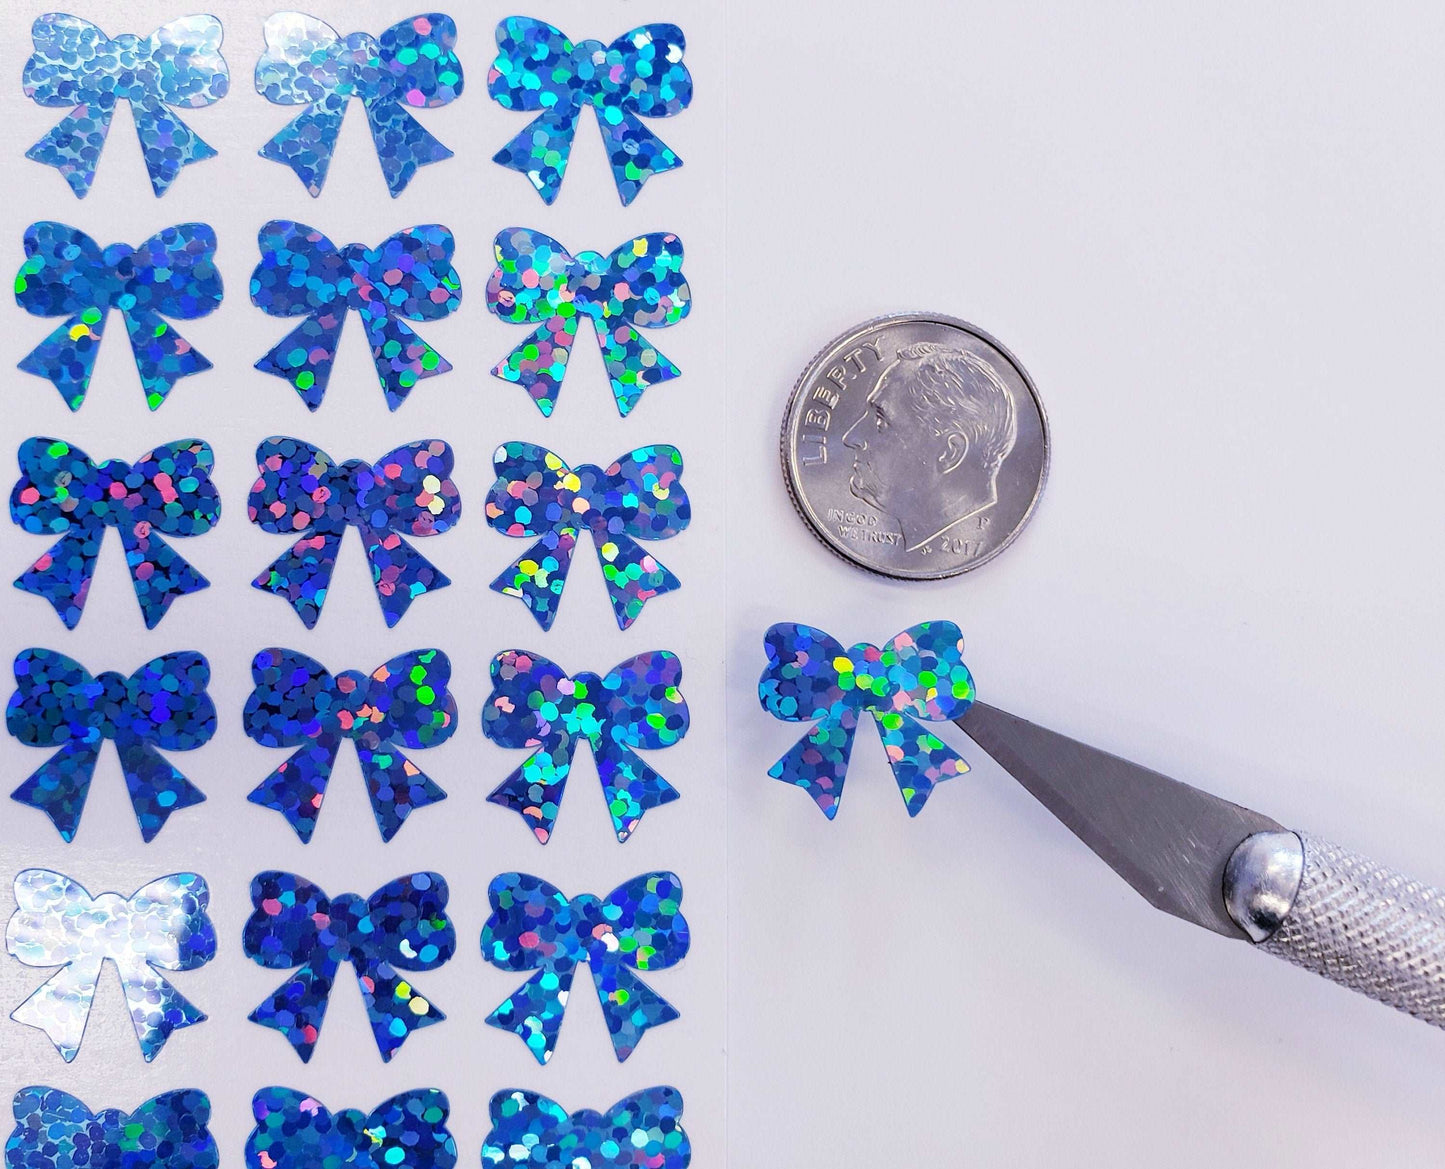 Blue Ribbon Stickers, set of 25, 50 or 100 tiny blue bow vinyl stickers for ornaments, craft projects, junk journals, laptops and envelopes